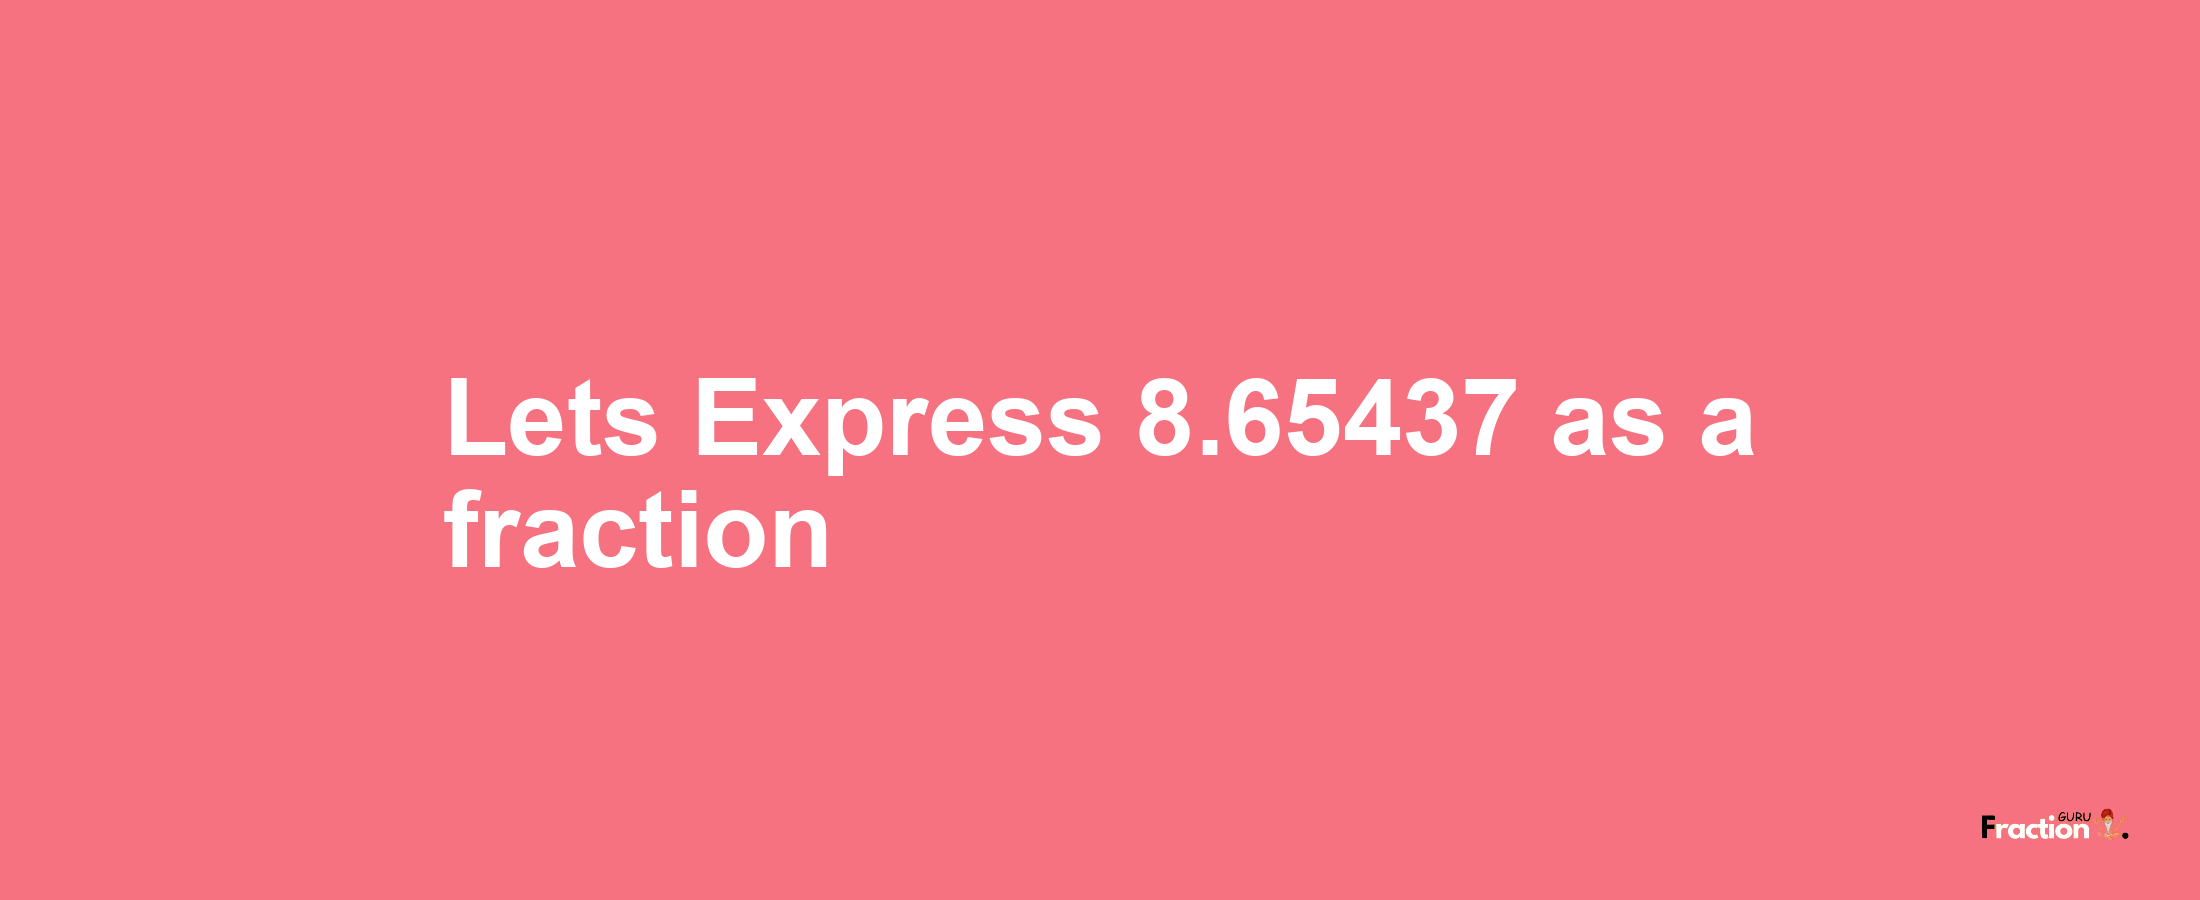 Lets Express 8.65437 as afraction